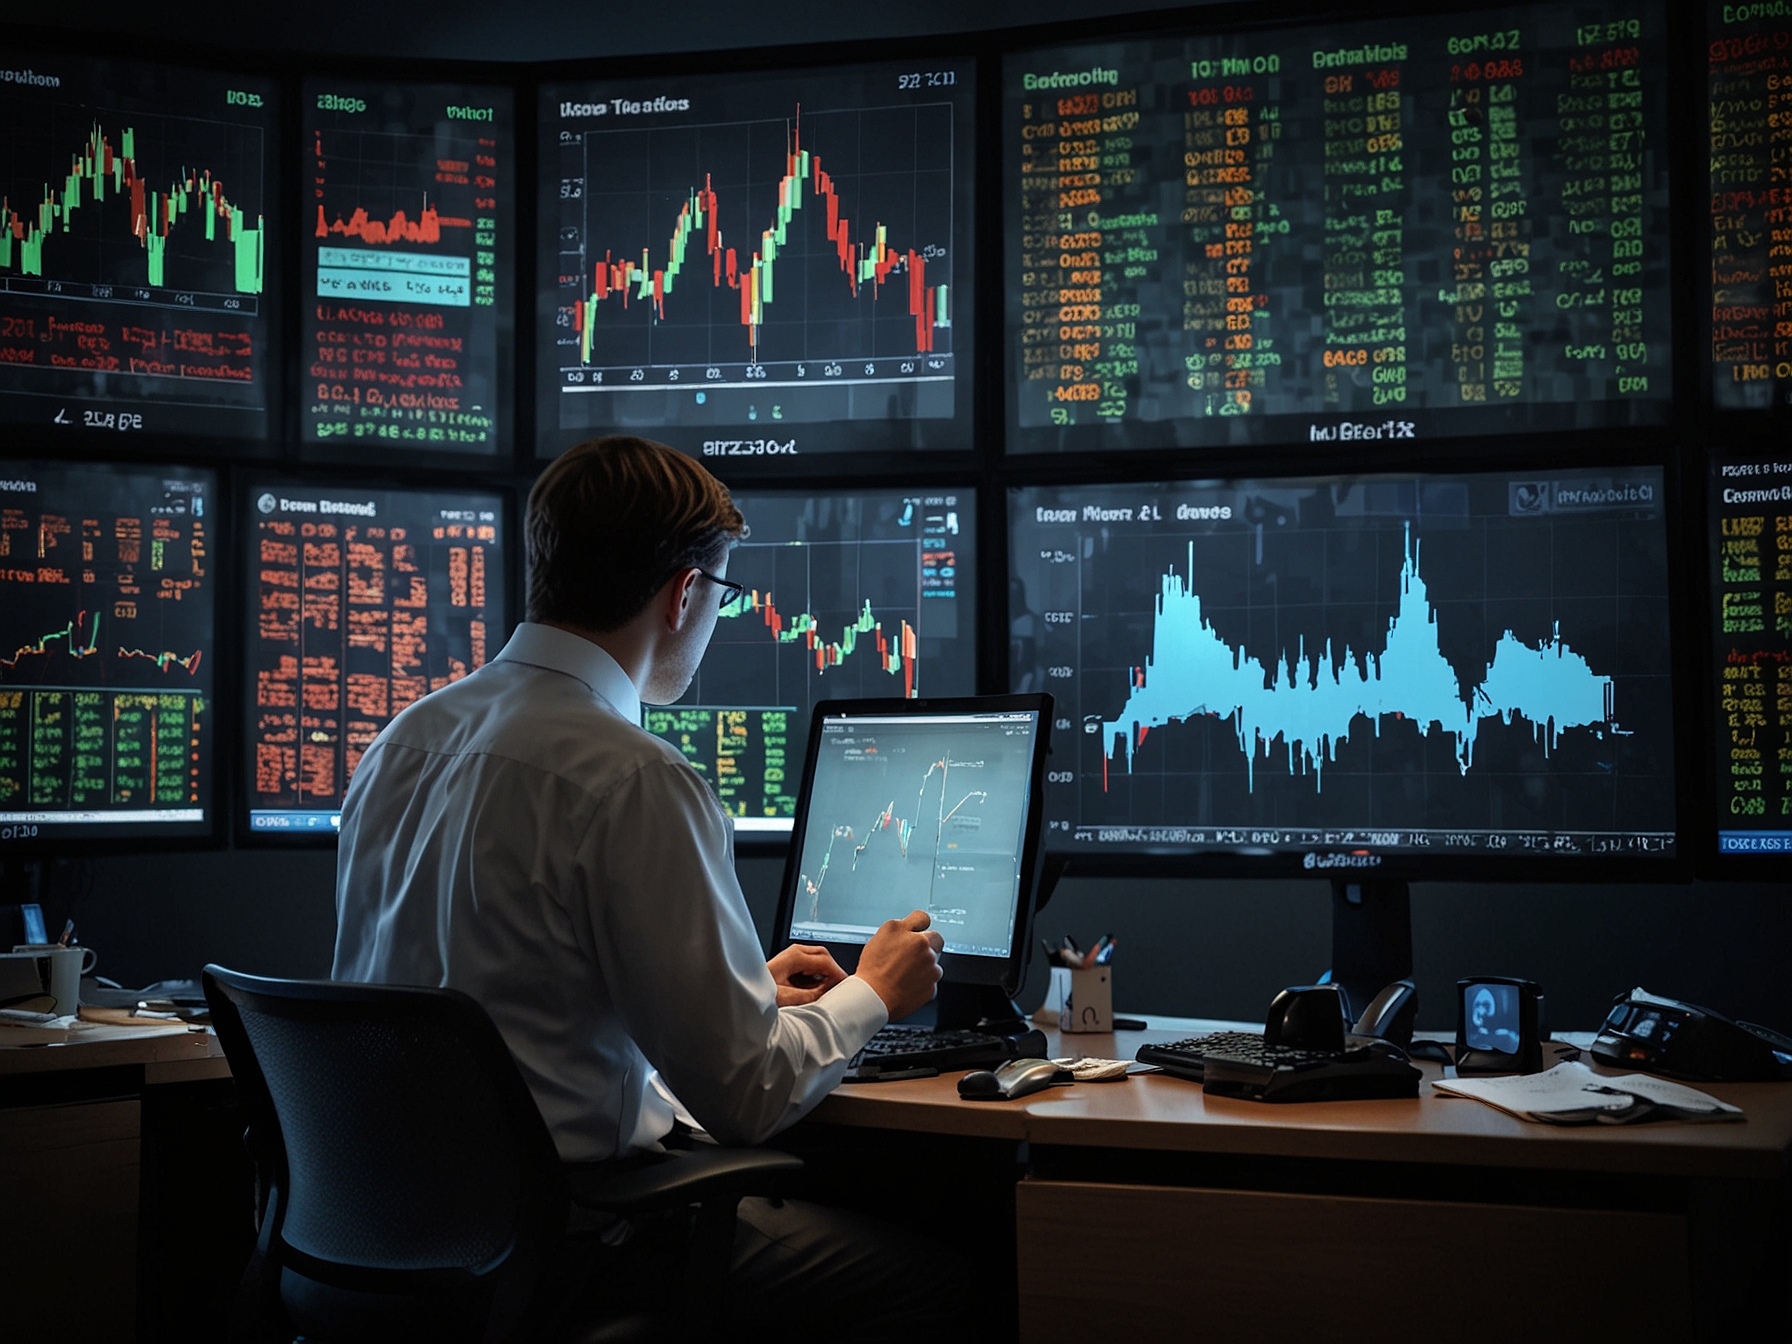 Traders monitoring the S&P/NZX 50 Index on a large screen, capturing the initial positive momentum and subsequent fluctuations throughout the trading session.